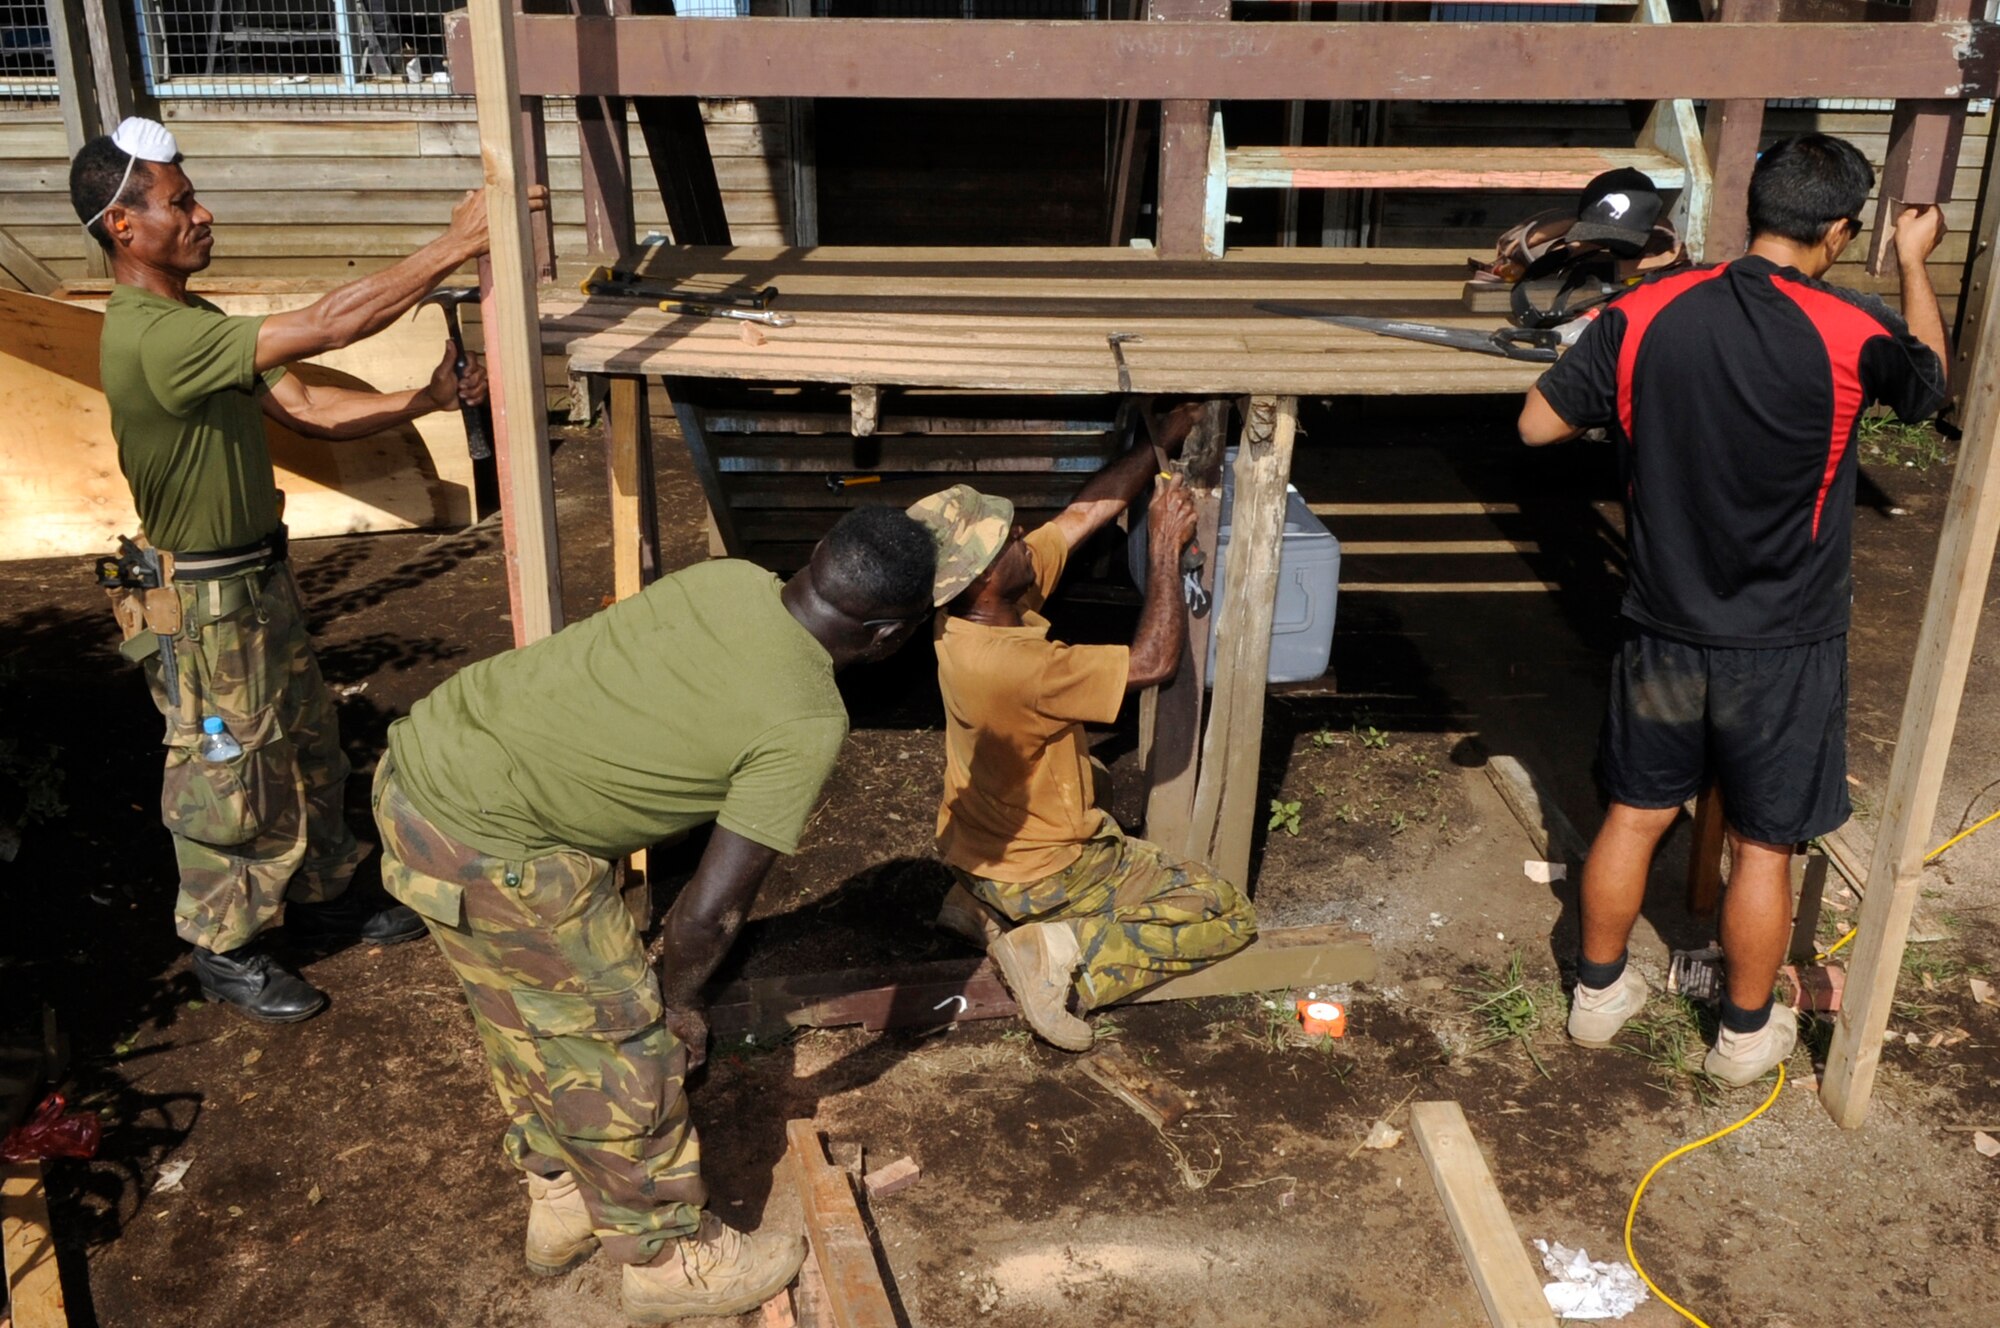 Papua New Guinea Defence Force carpenters and New Zealand Army carpenters repair an unstable staircase during Pacific Angel 15-4 at Gahuku Primary School in the Eastern Highlands Providence, Papua New Guinea, June 2, 2015. Pacific Angel is a U.S Pacific Command multilateral humanitarian assistance civil military operation, which improves military-to-military partnerships in the Pacific while also providing medical health outreach, civic engineering projects and subject matter exchanges among partner forces. (U.S. Air Force photo by Staff Sgt. Marcus Morris/Released)